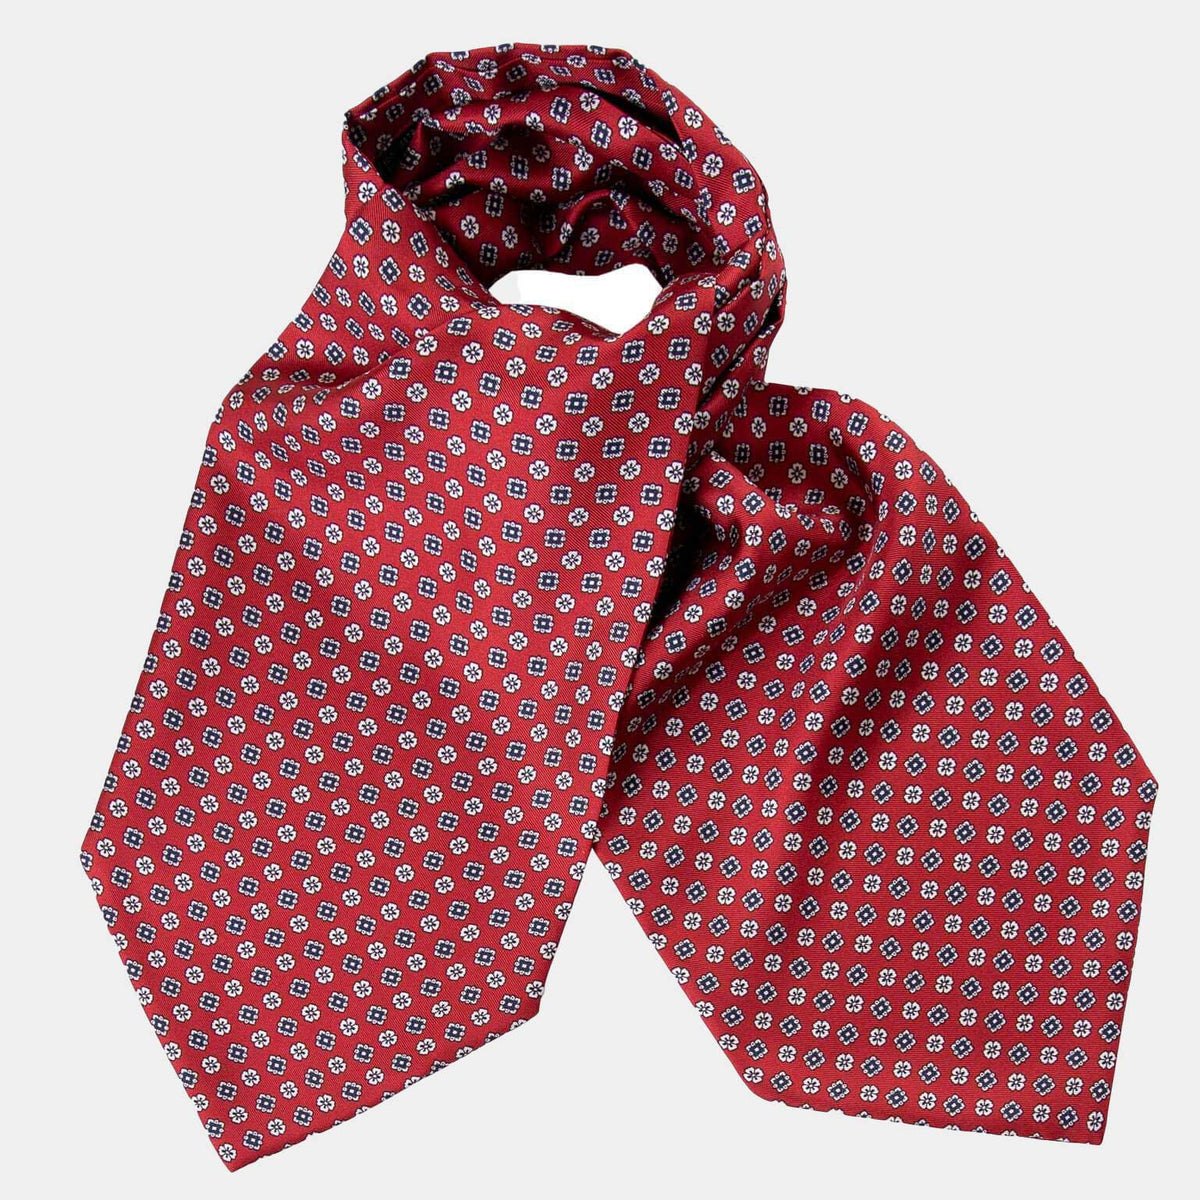 Red Ascot Tie - Micro Floral Print - Made in Italy